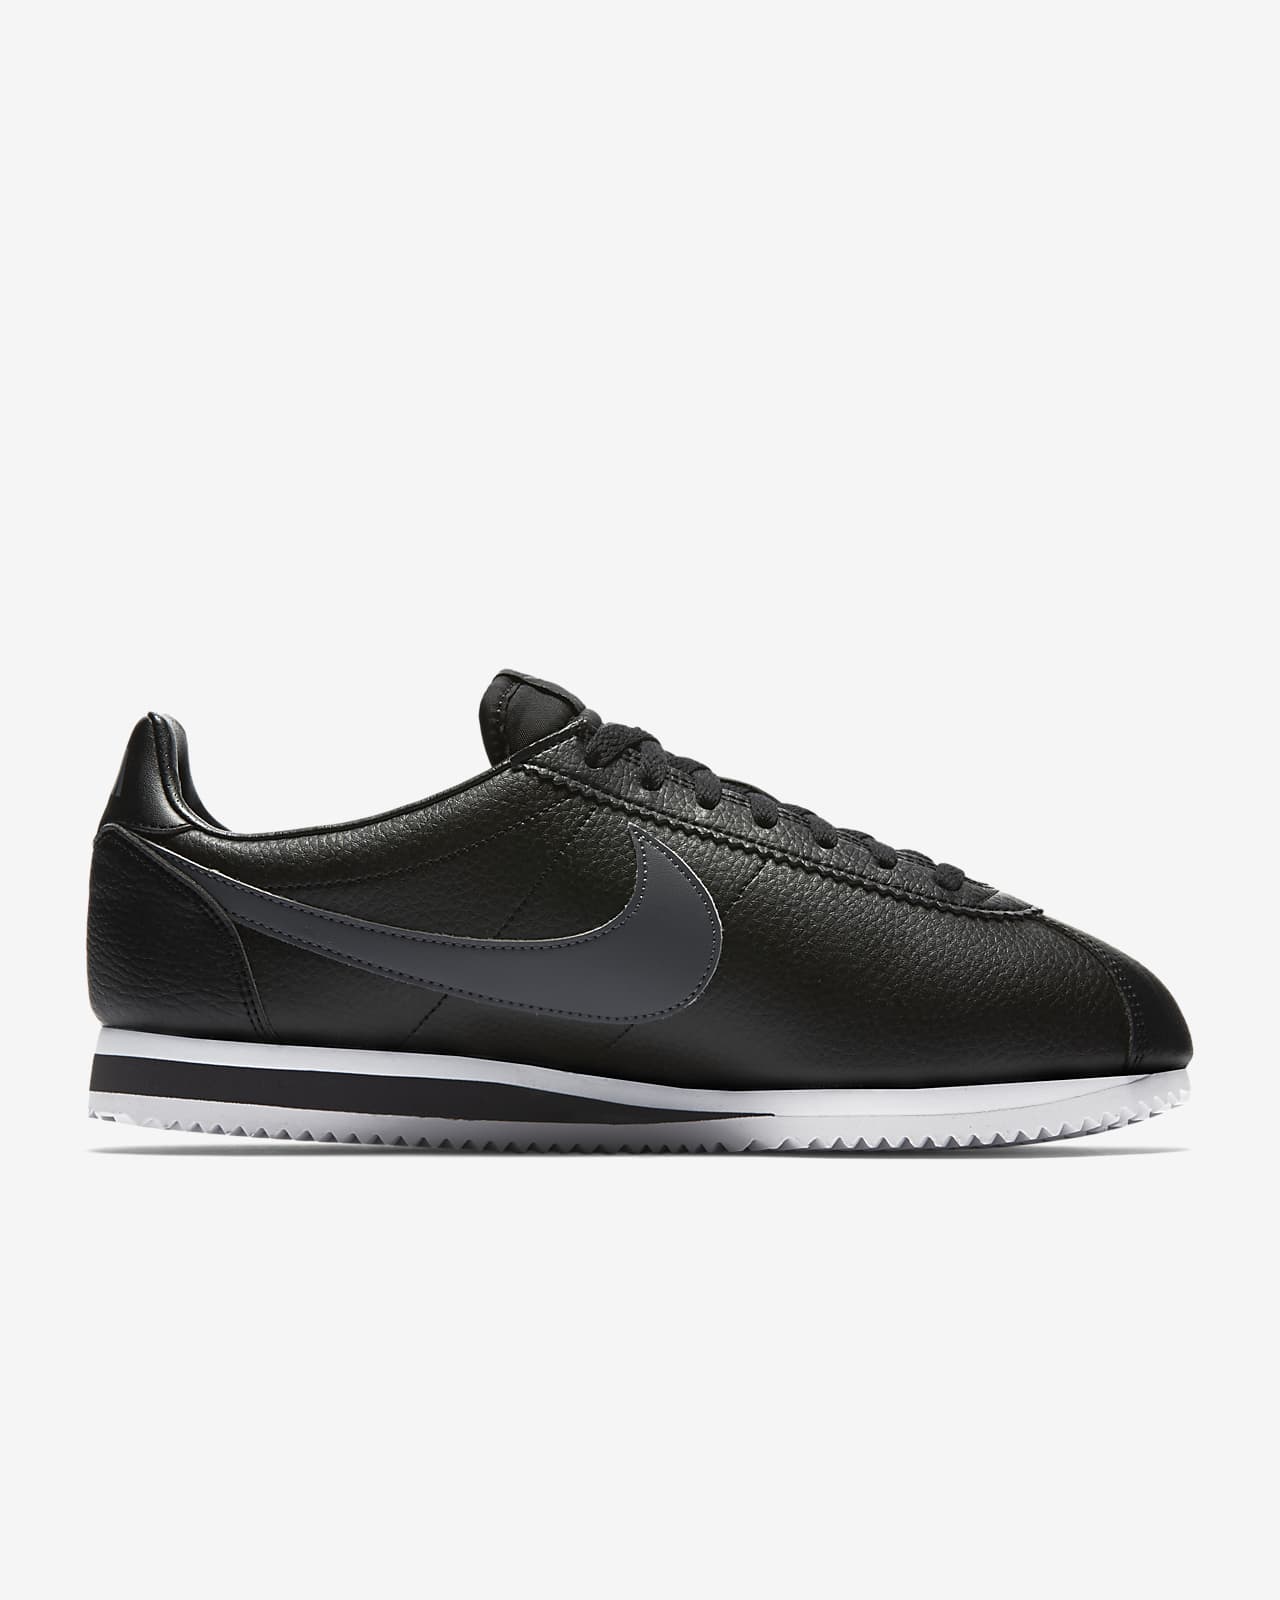 nike cortez black and grey Online Shopping -